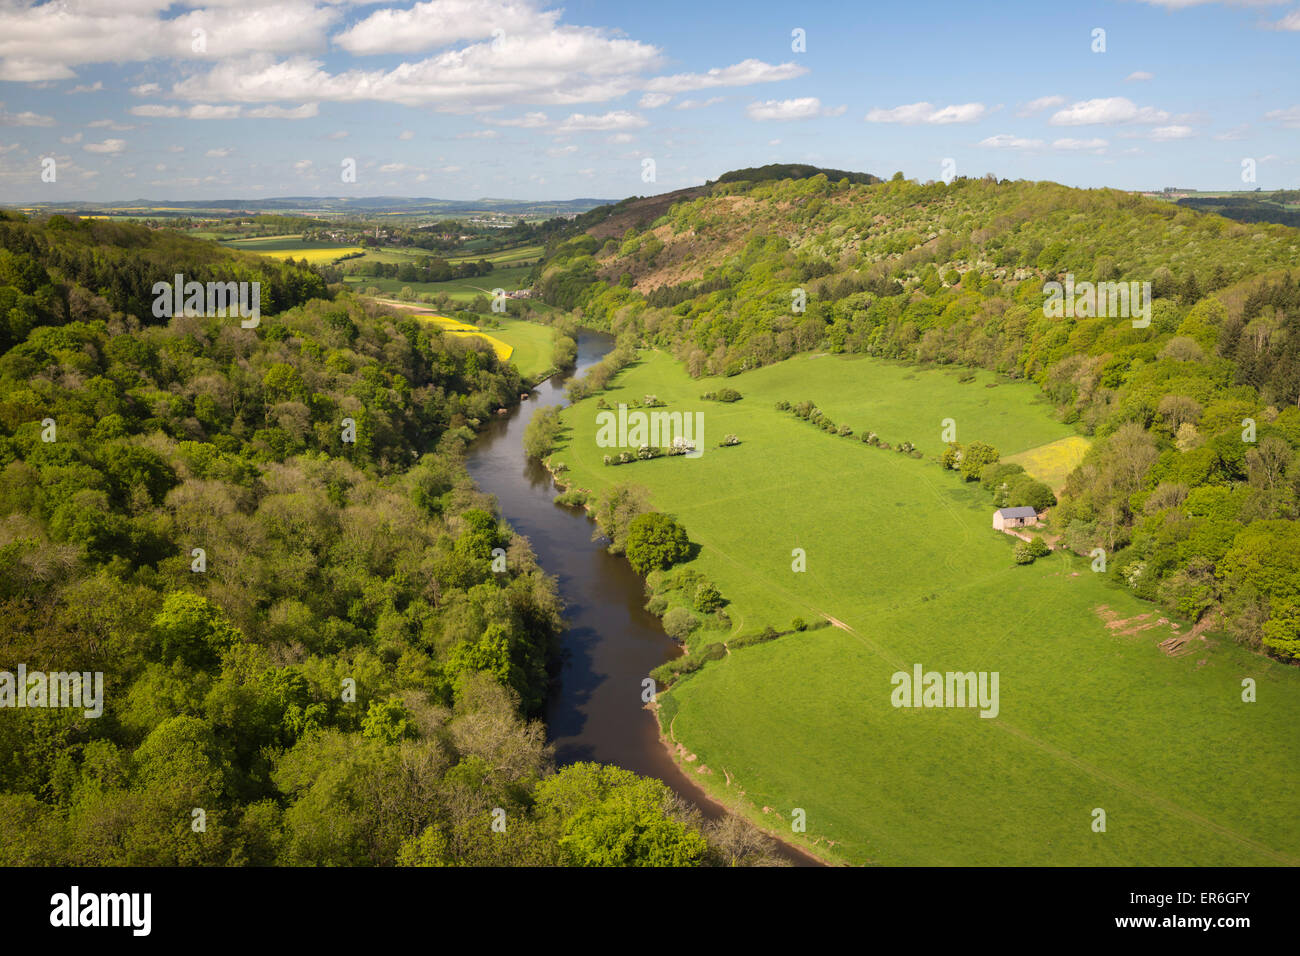 View over Wye Valley from Symonds Yat Rock, Symonds Yat, Forest of Dean, Herefordshire, England, United Kingdom, Europe Stock Photo